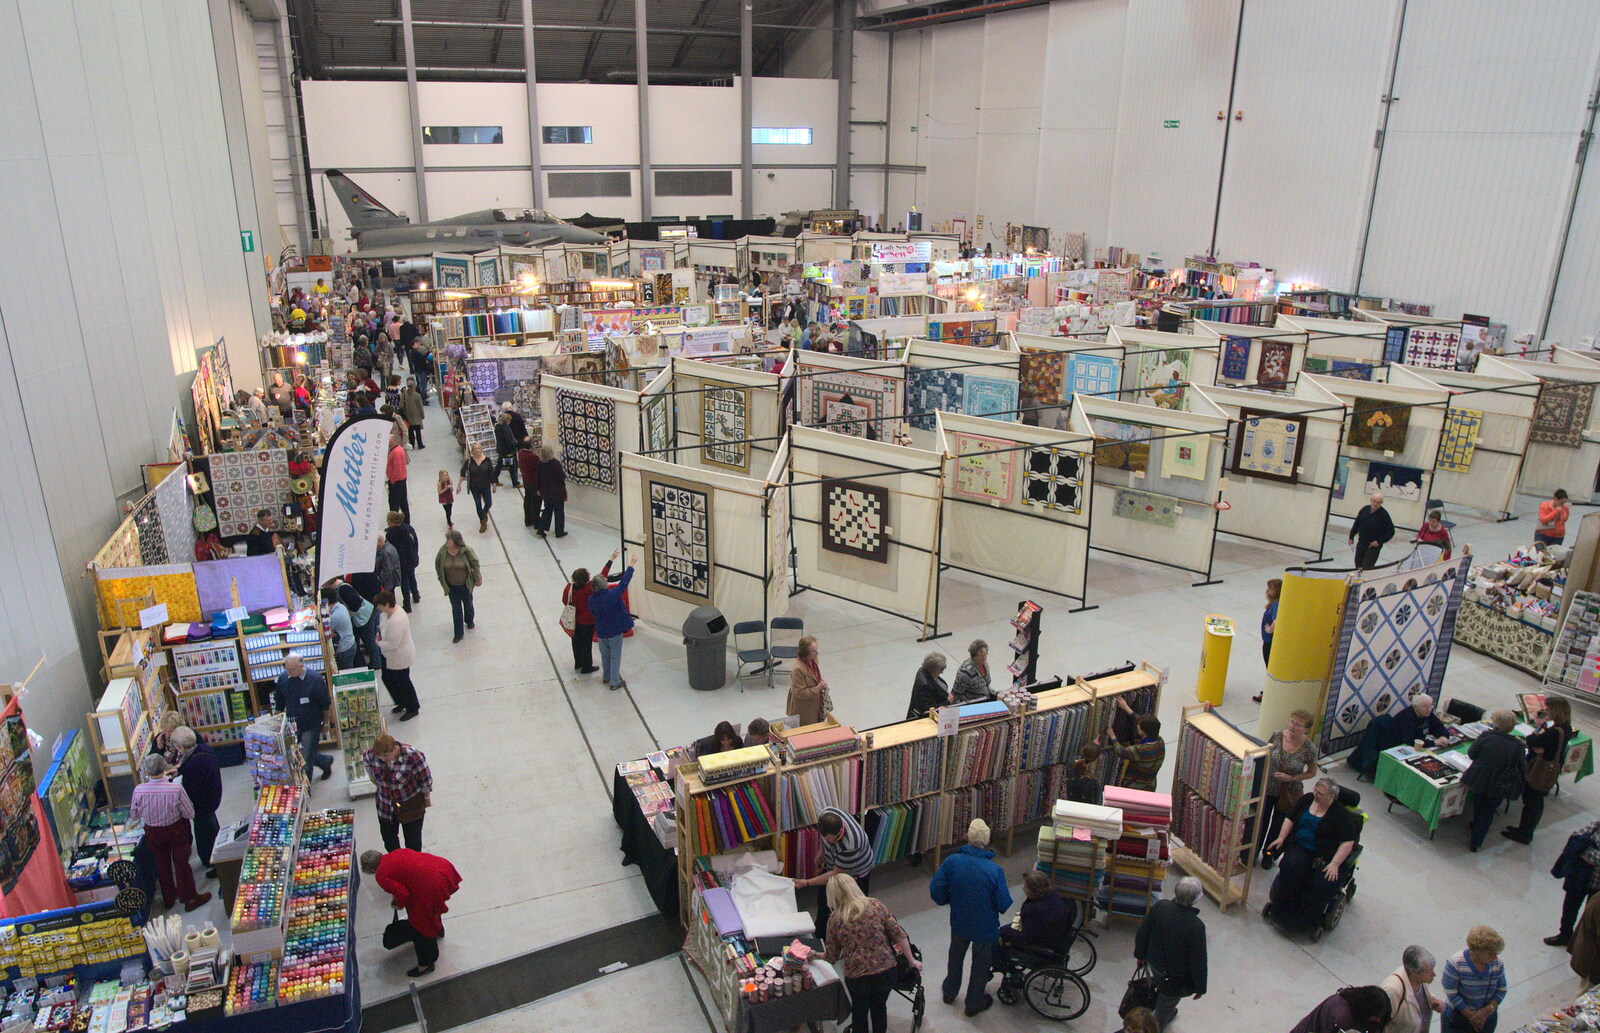 In an adjacent hall, 'Quilt World' takes place from A Day Out at Duxford, Cambridgeshire - 9th March 2014